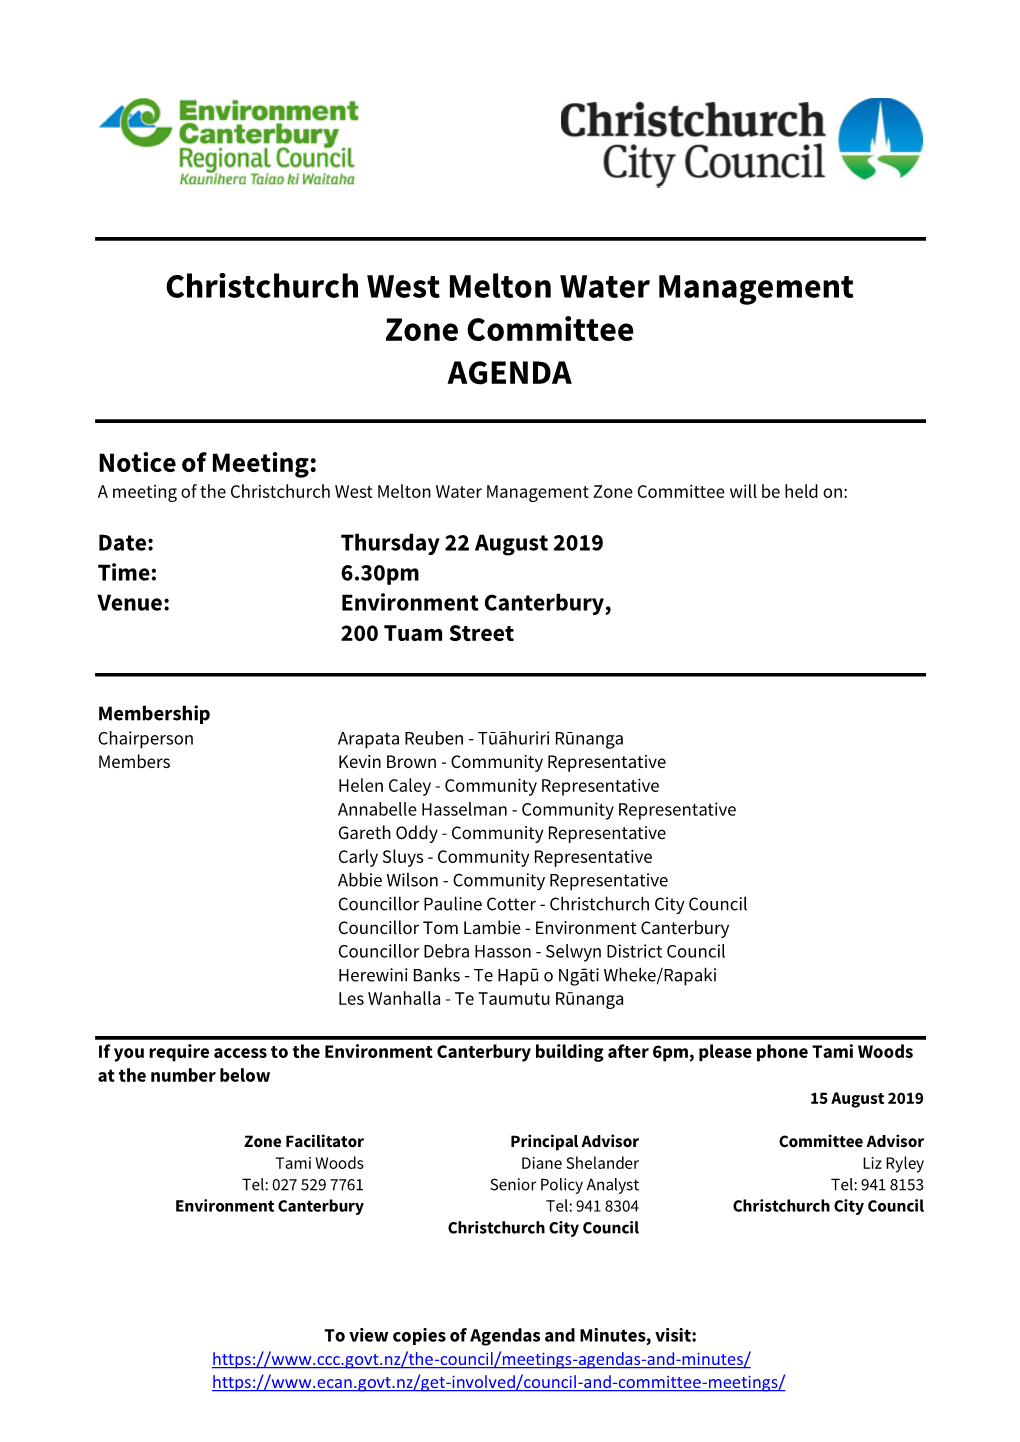 Agenda of Christchurch West Melton Water Management Zone Committee